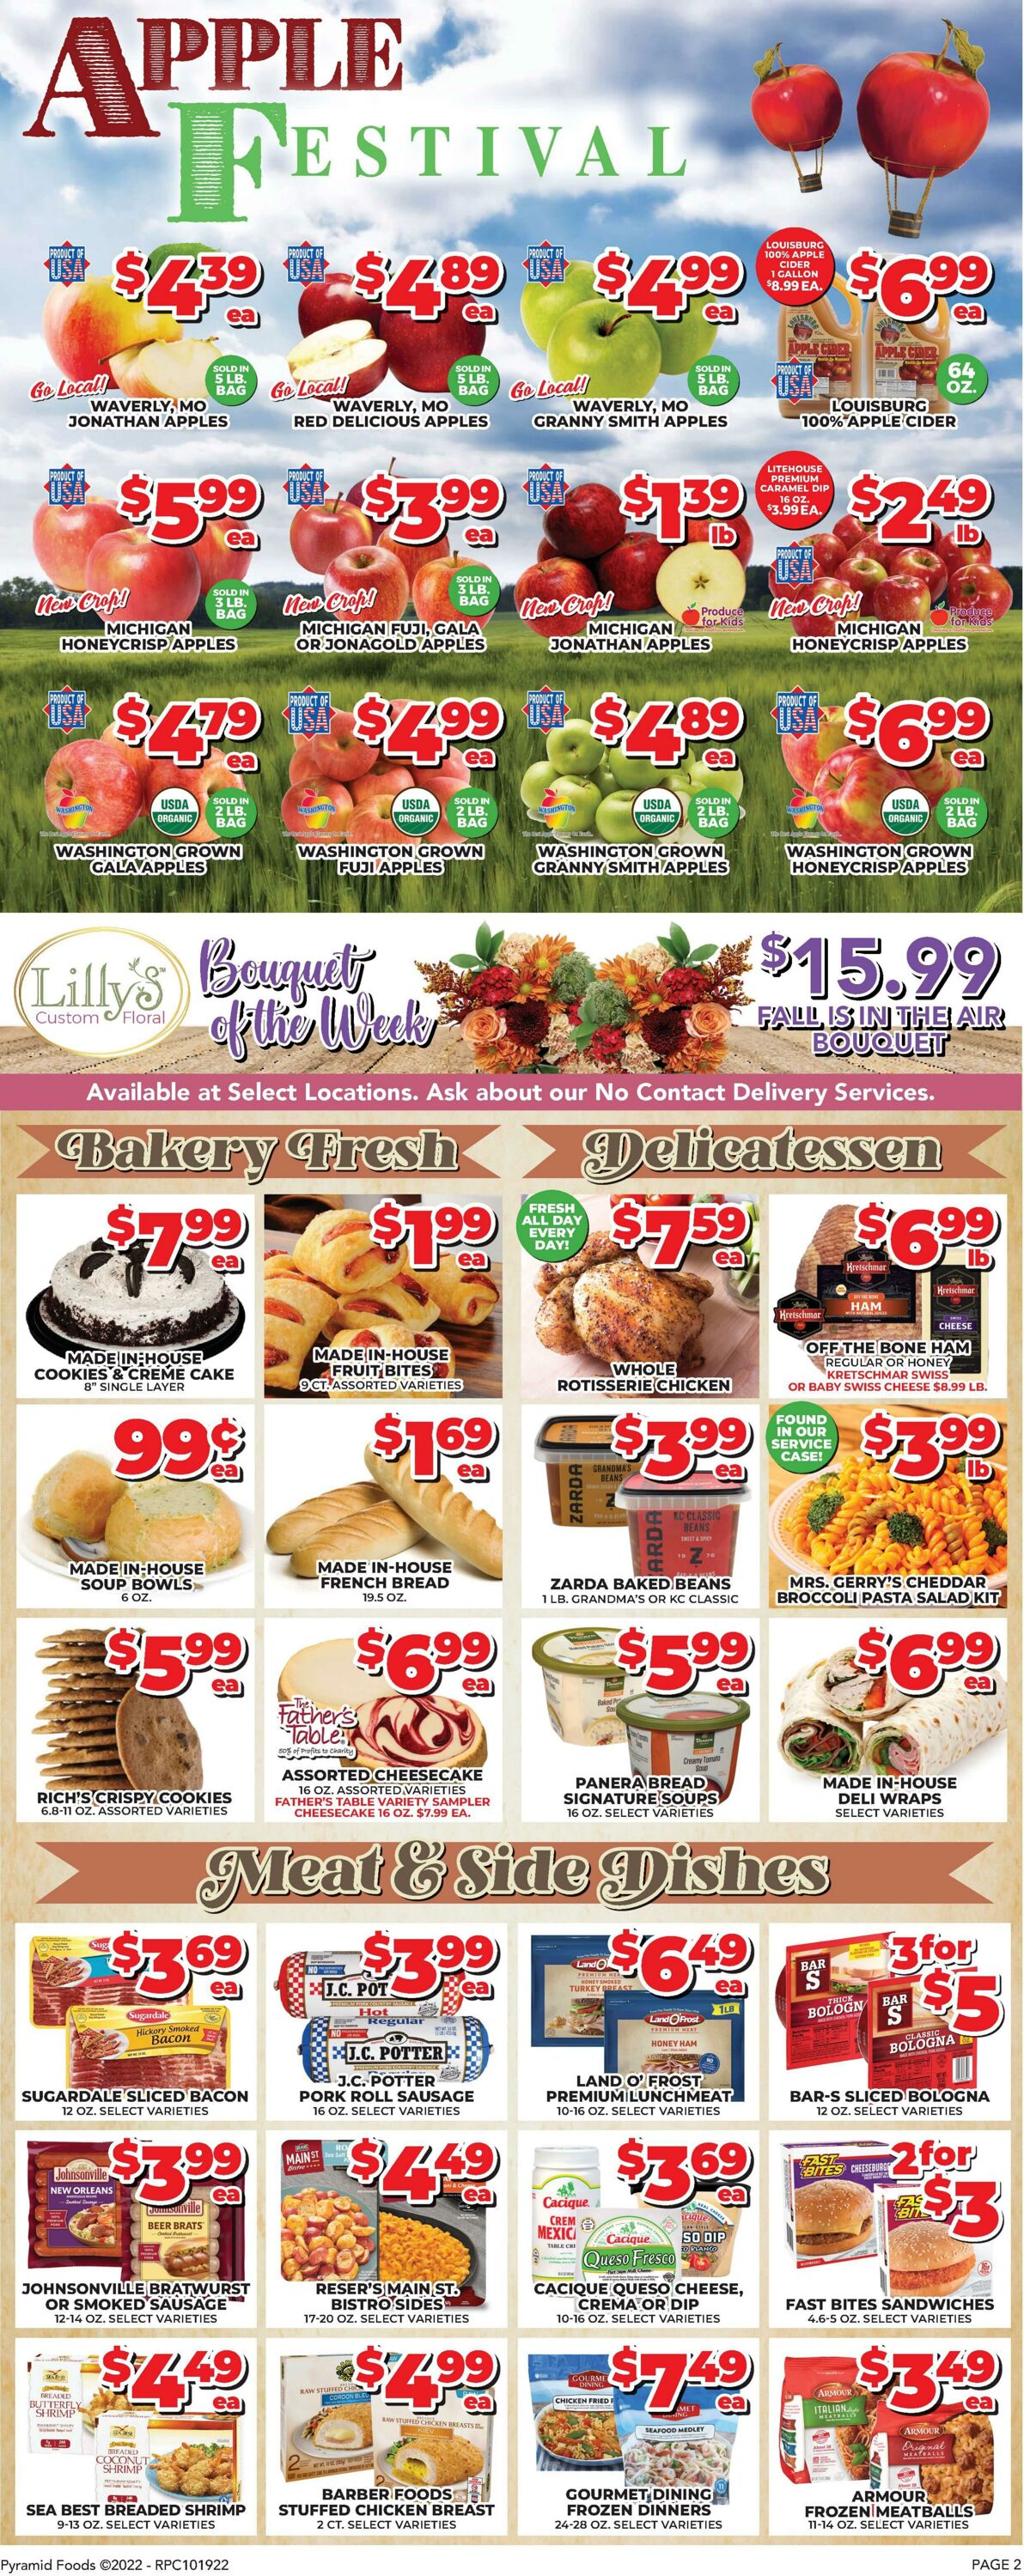 Weekly ad Price Cutter 10/19/2022 - 10/25/2022